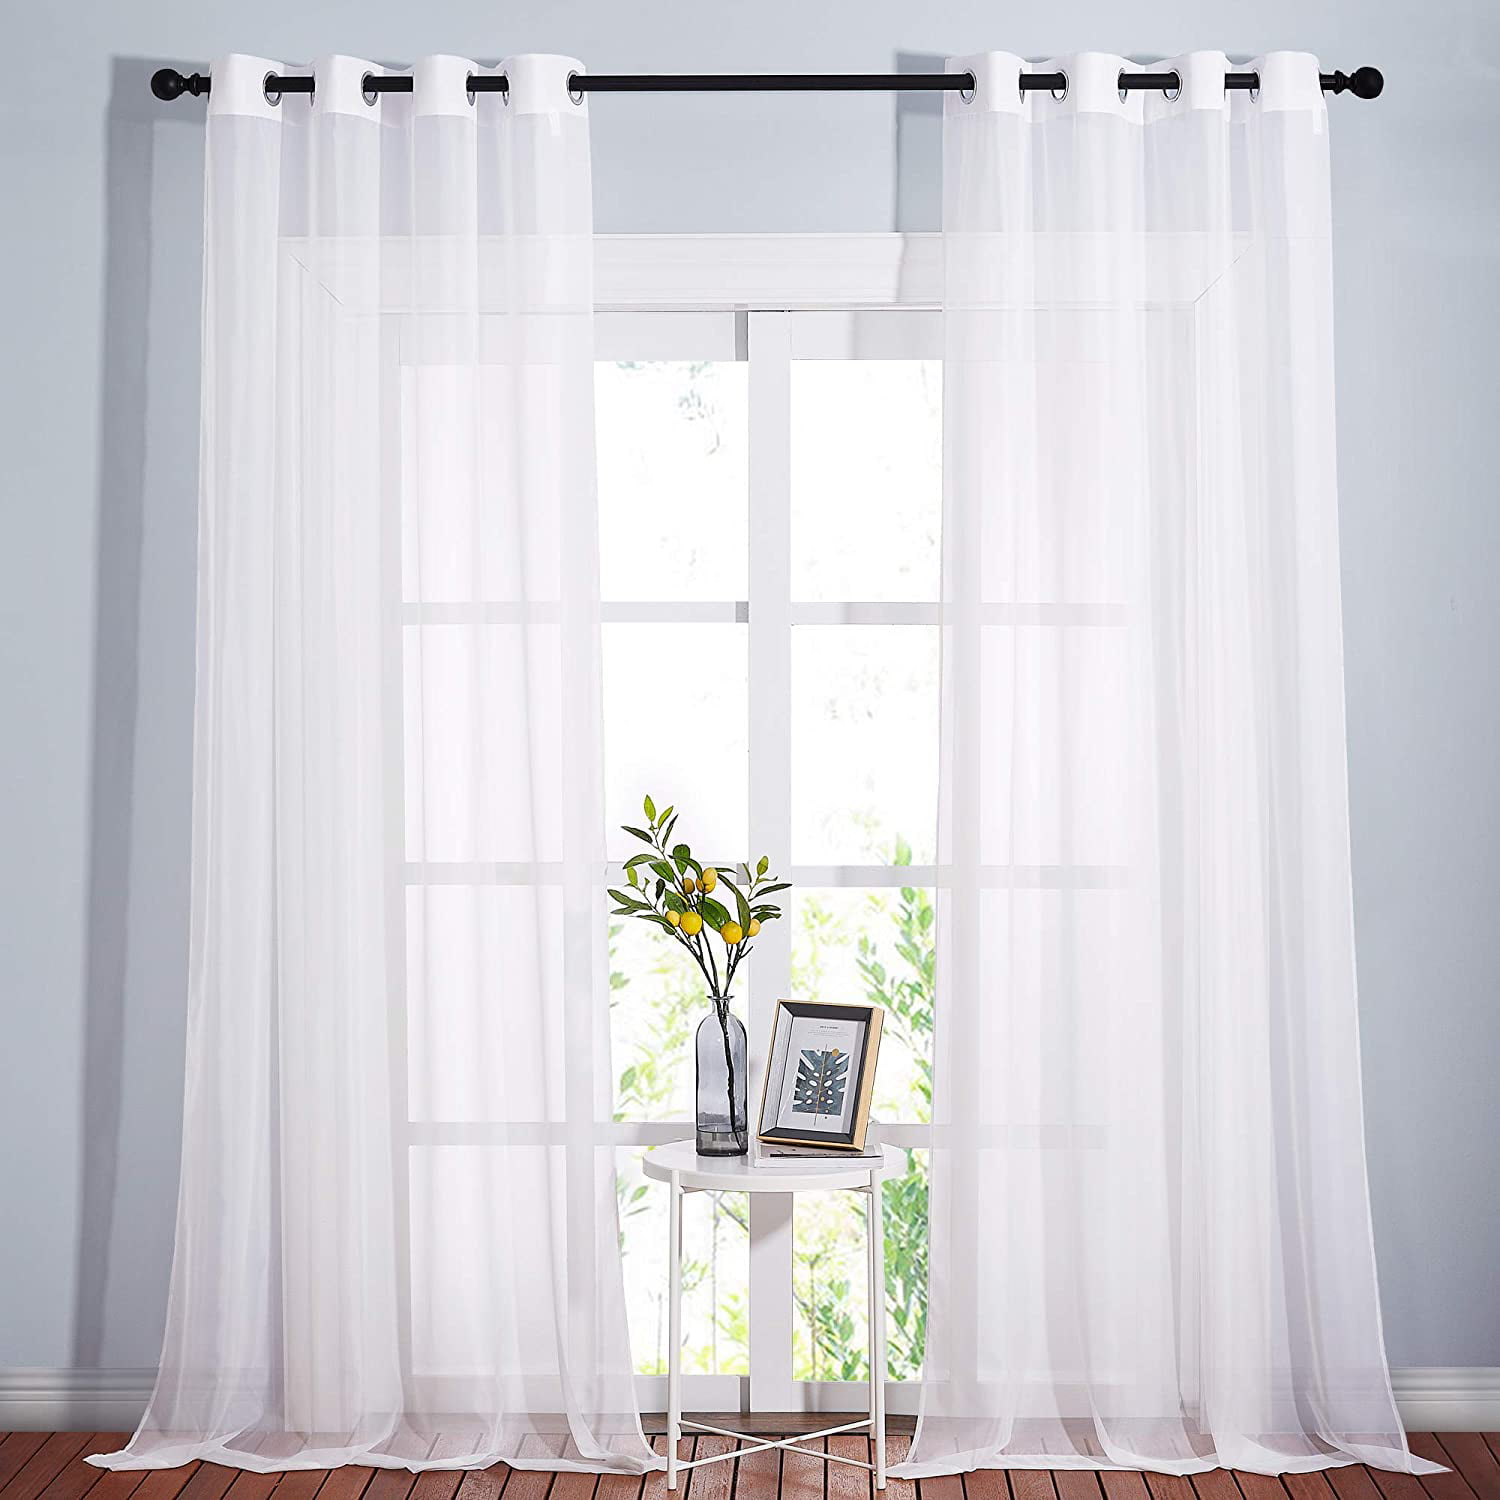 ELEGANCE 1PC SOLID VOILE SHEER WINDOW DRESSING CURTAIN GROMMET PANEL DRAPES 